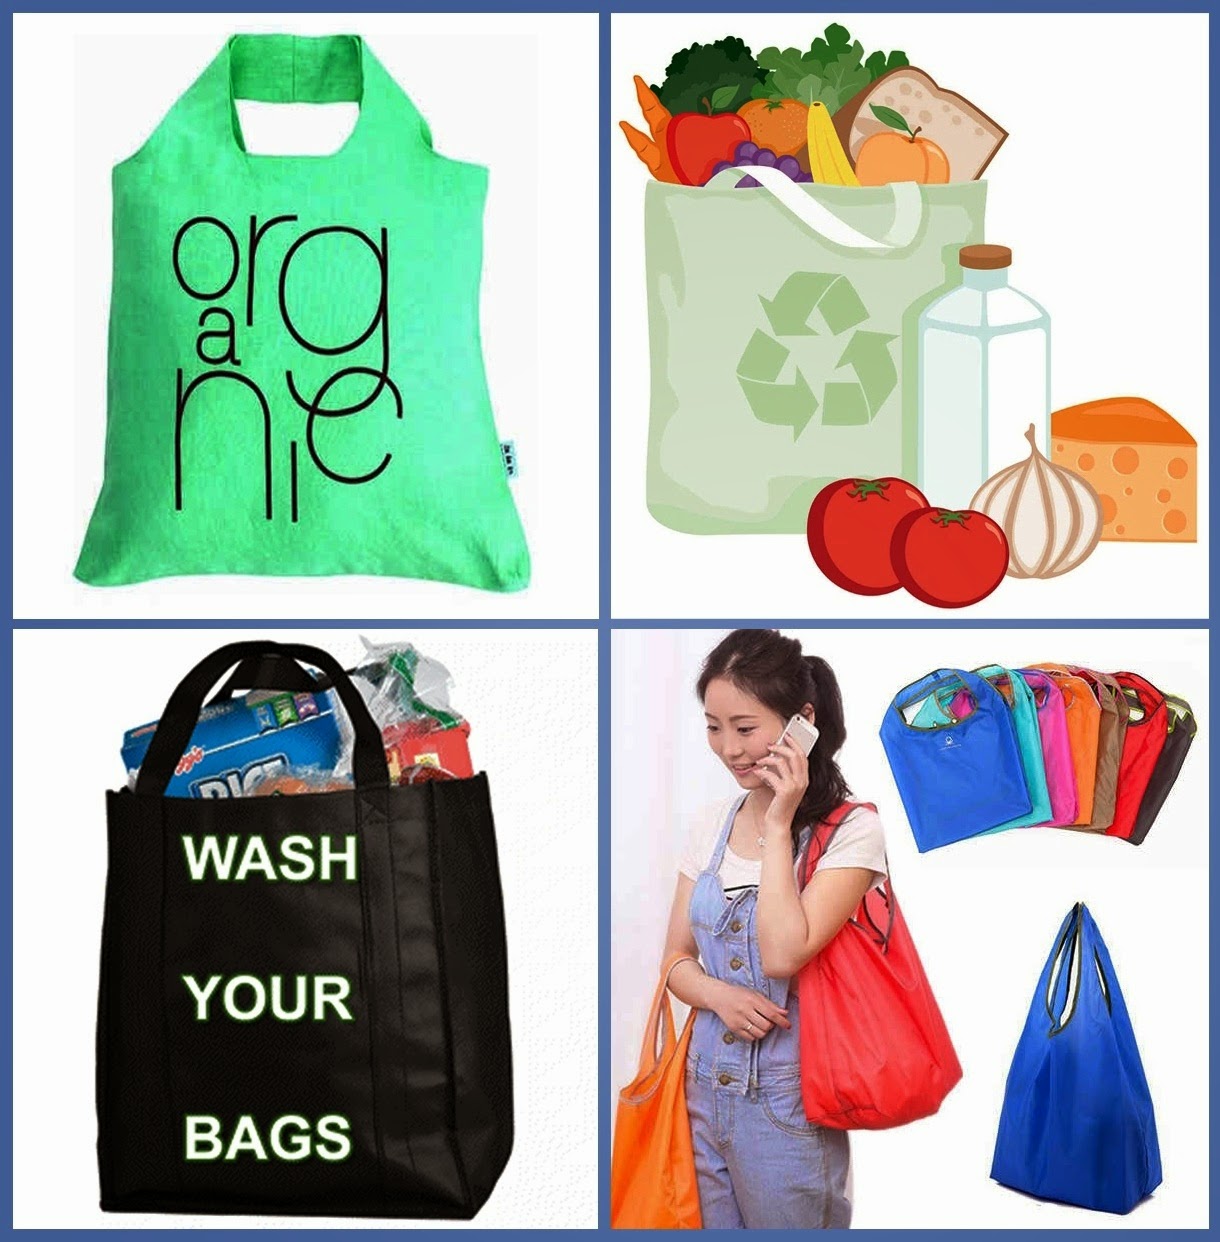 Reusable Shopping Bag Manufacturing | Small Business Ideas